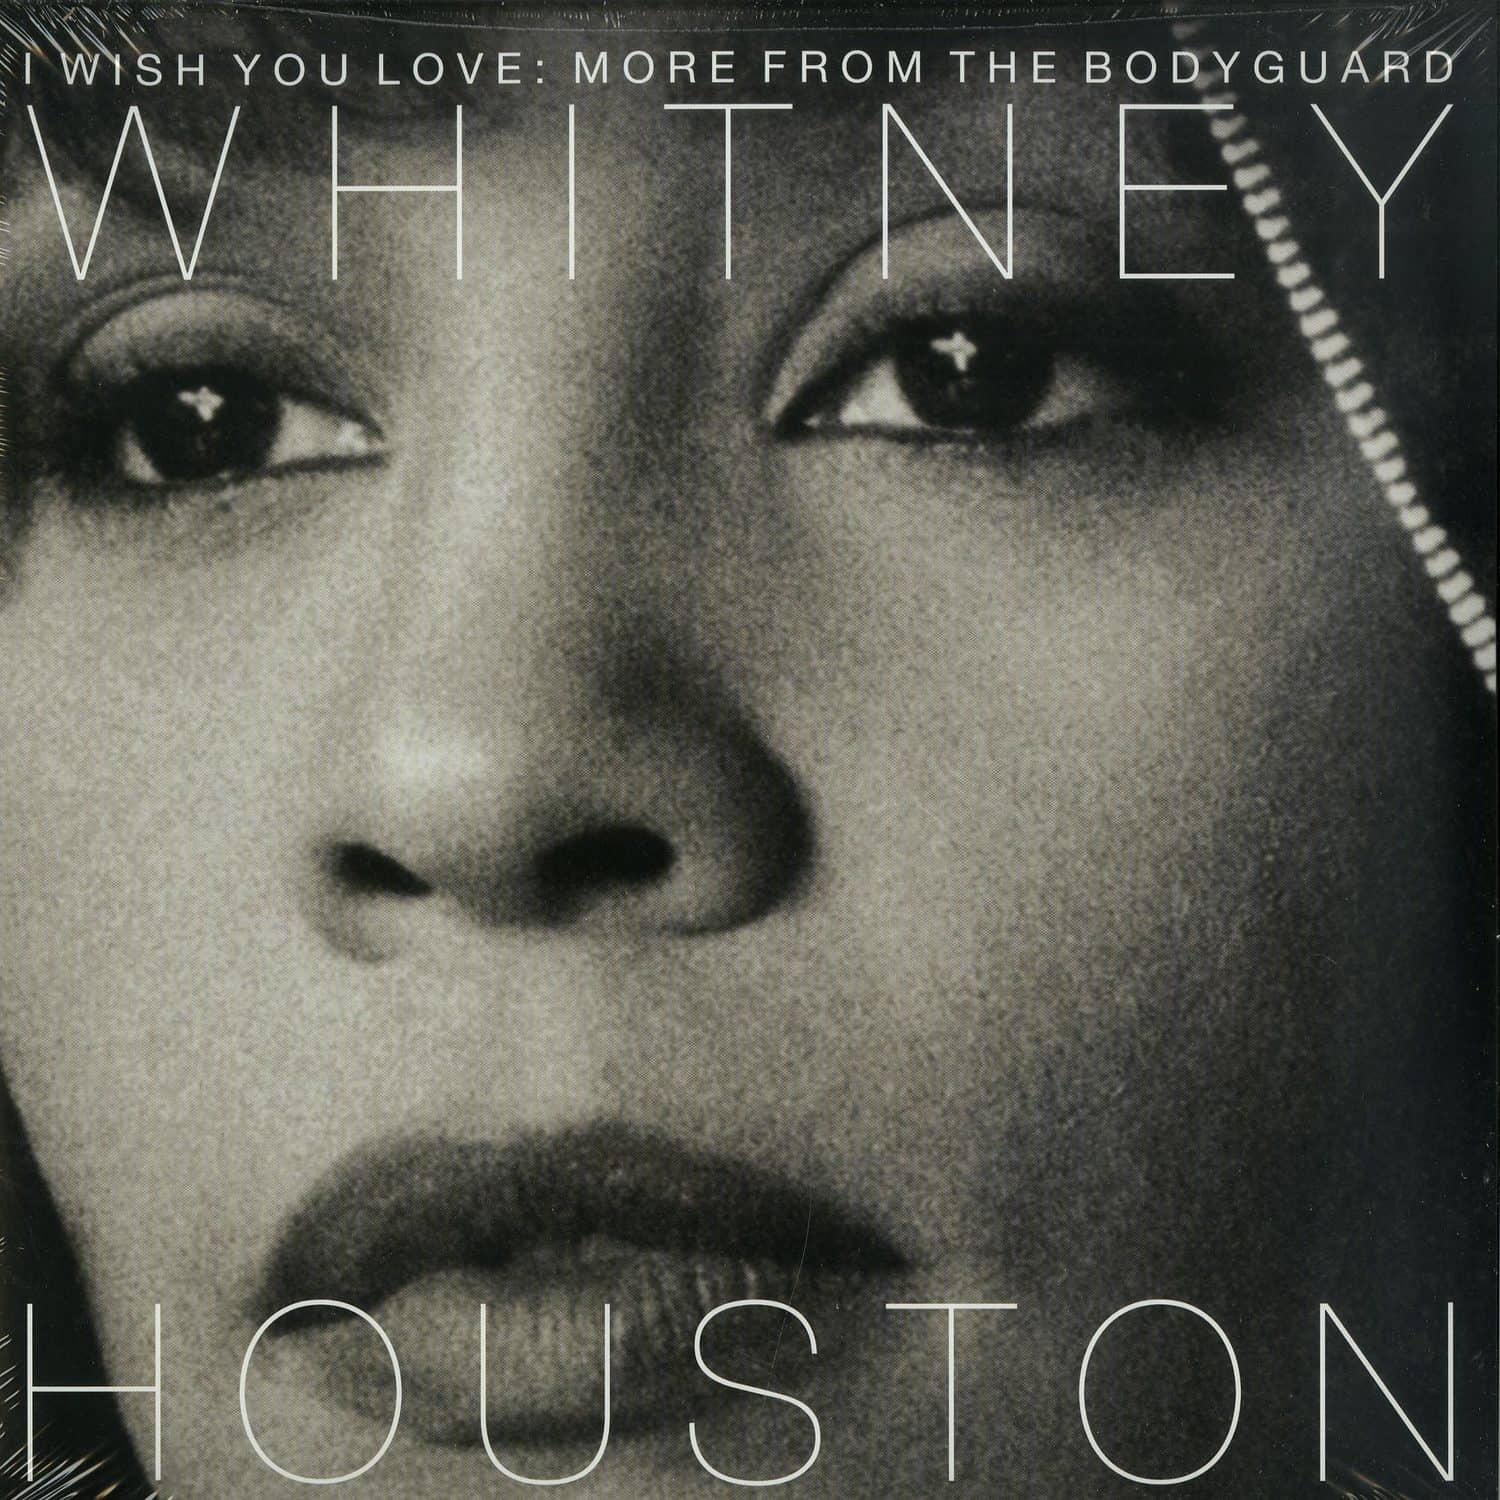 Whitney Houston - I WISH YOU LOVE: MORE FROM THE BODYGUARD 